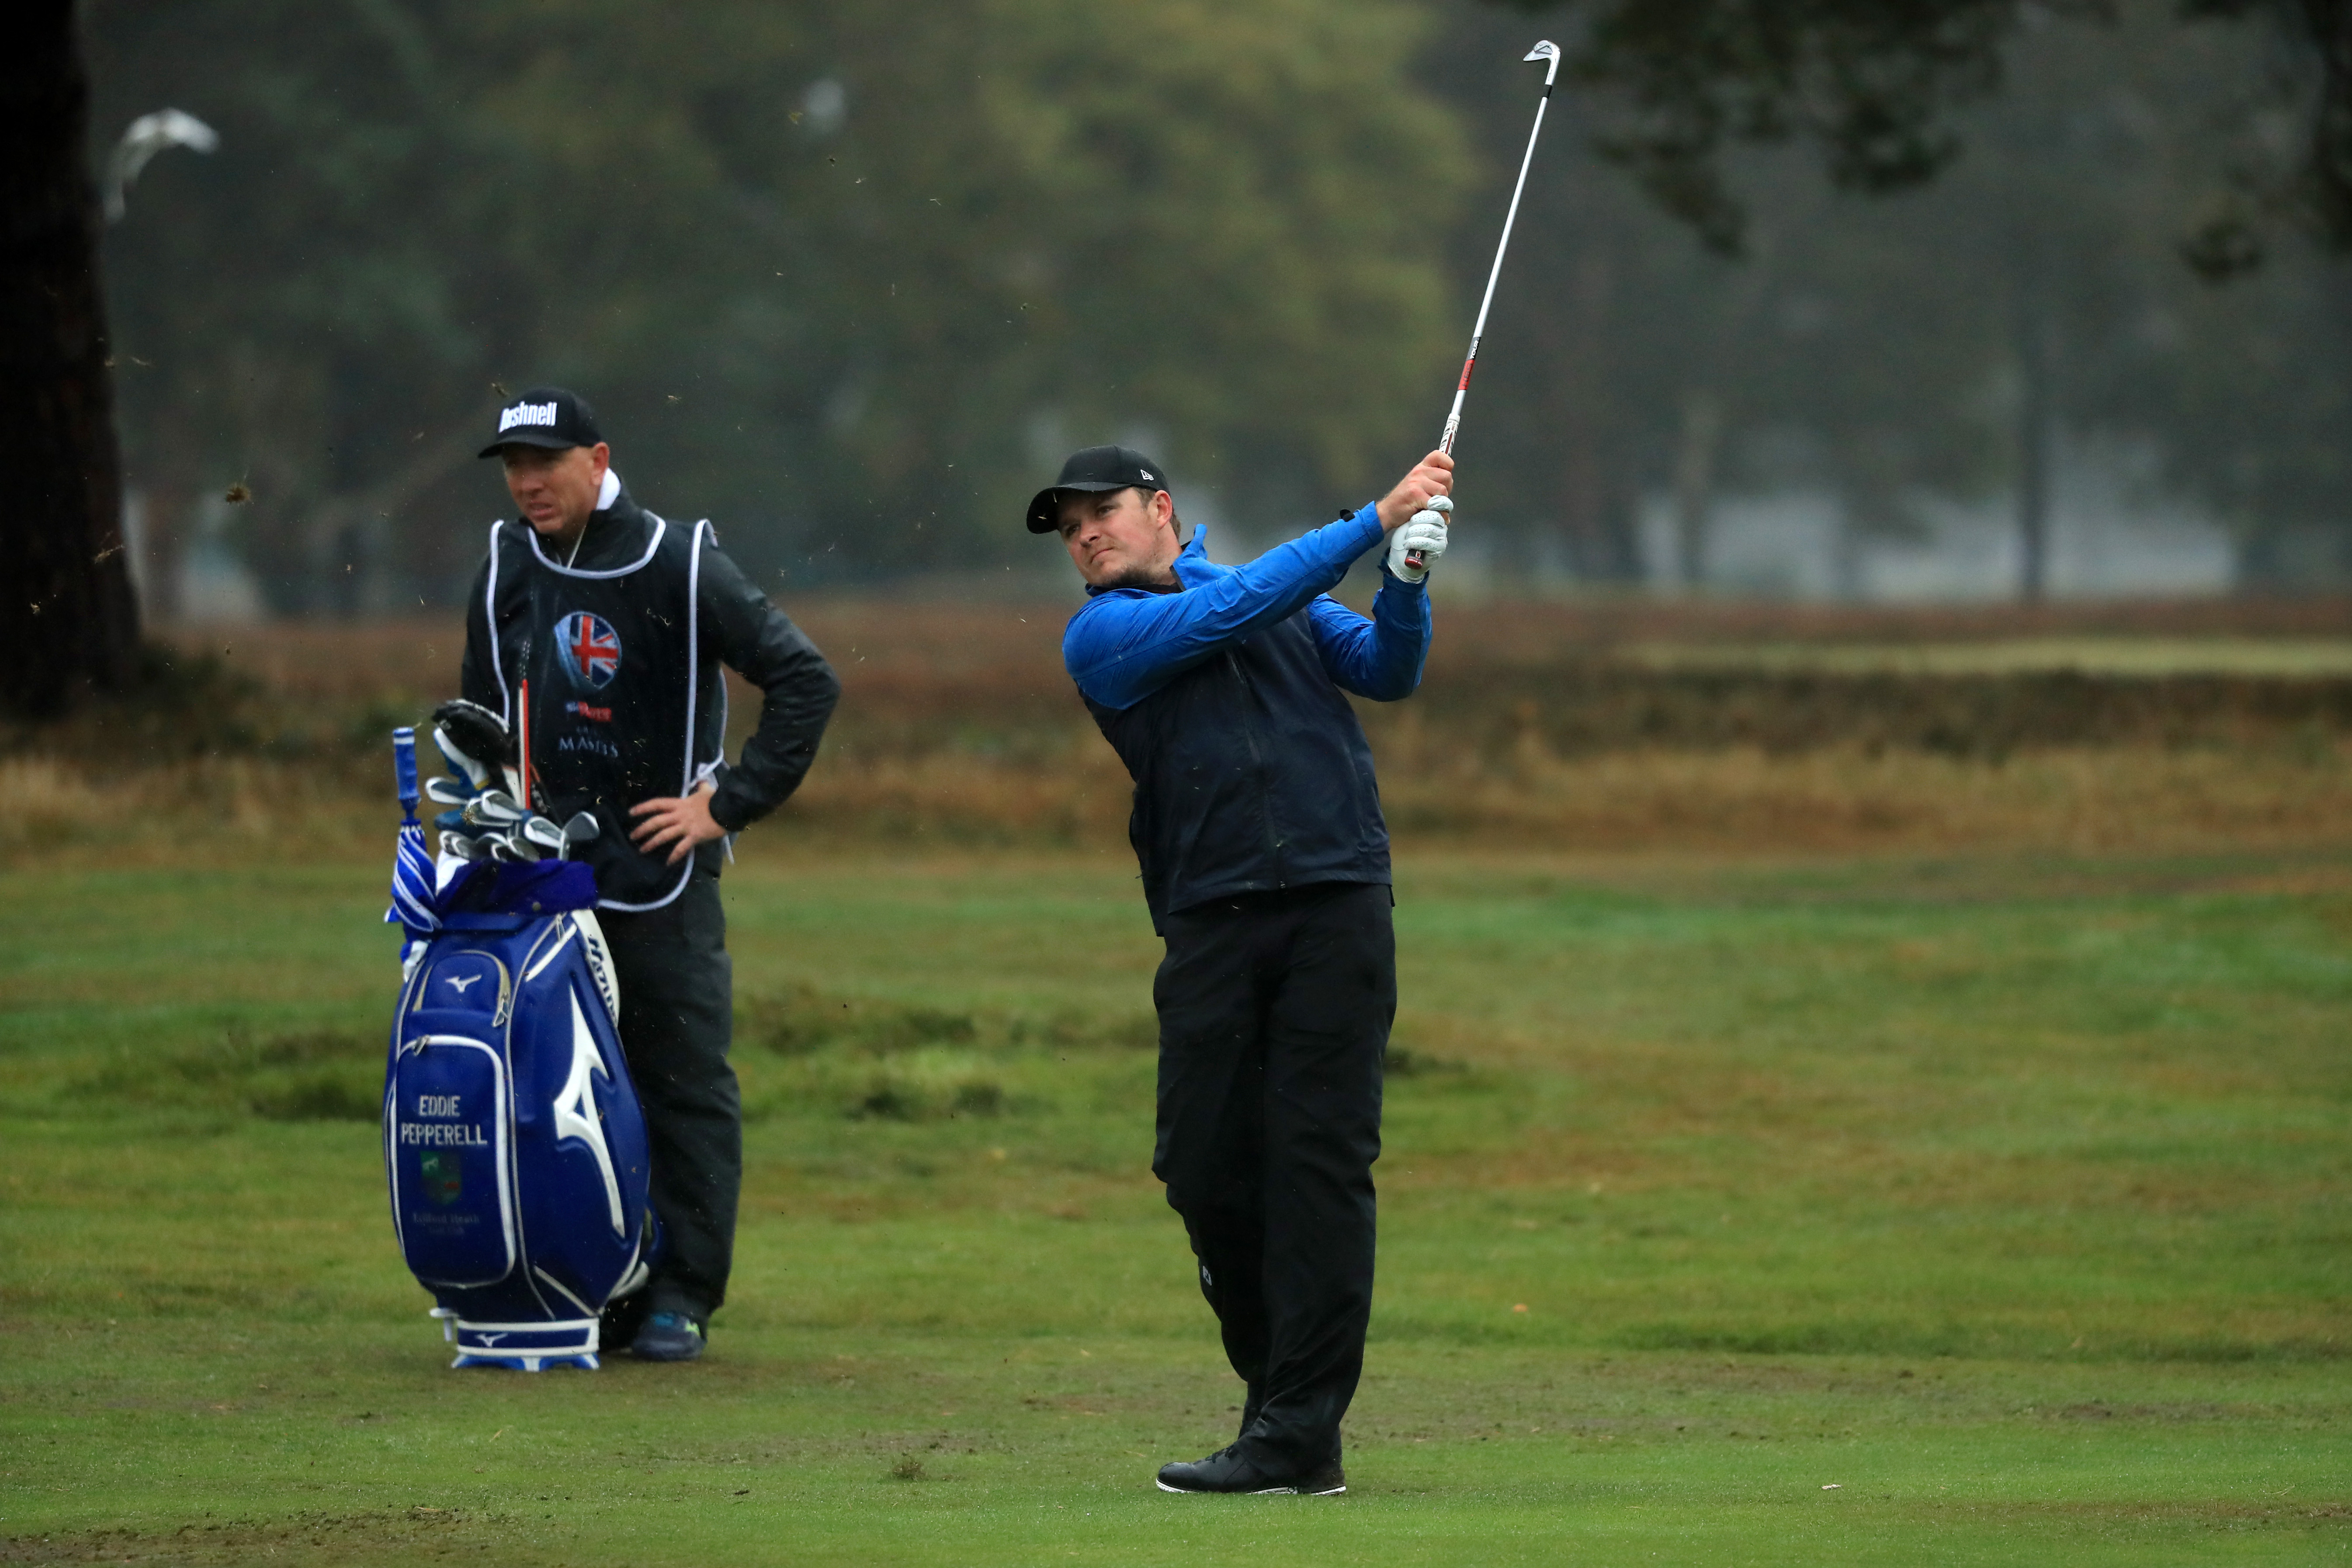 How a broken 6-iron in Scotland helped Pepperell win British Masters